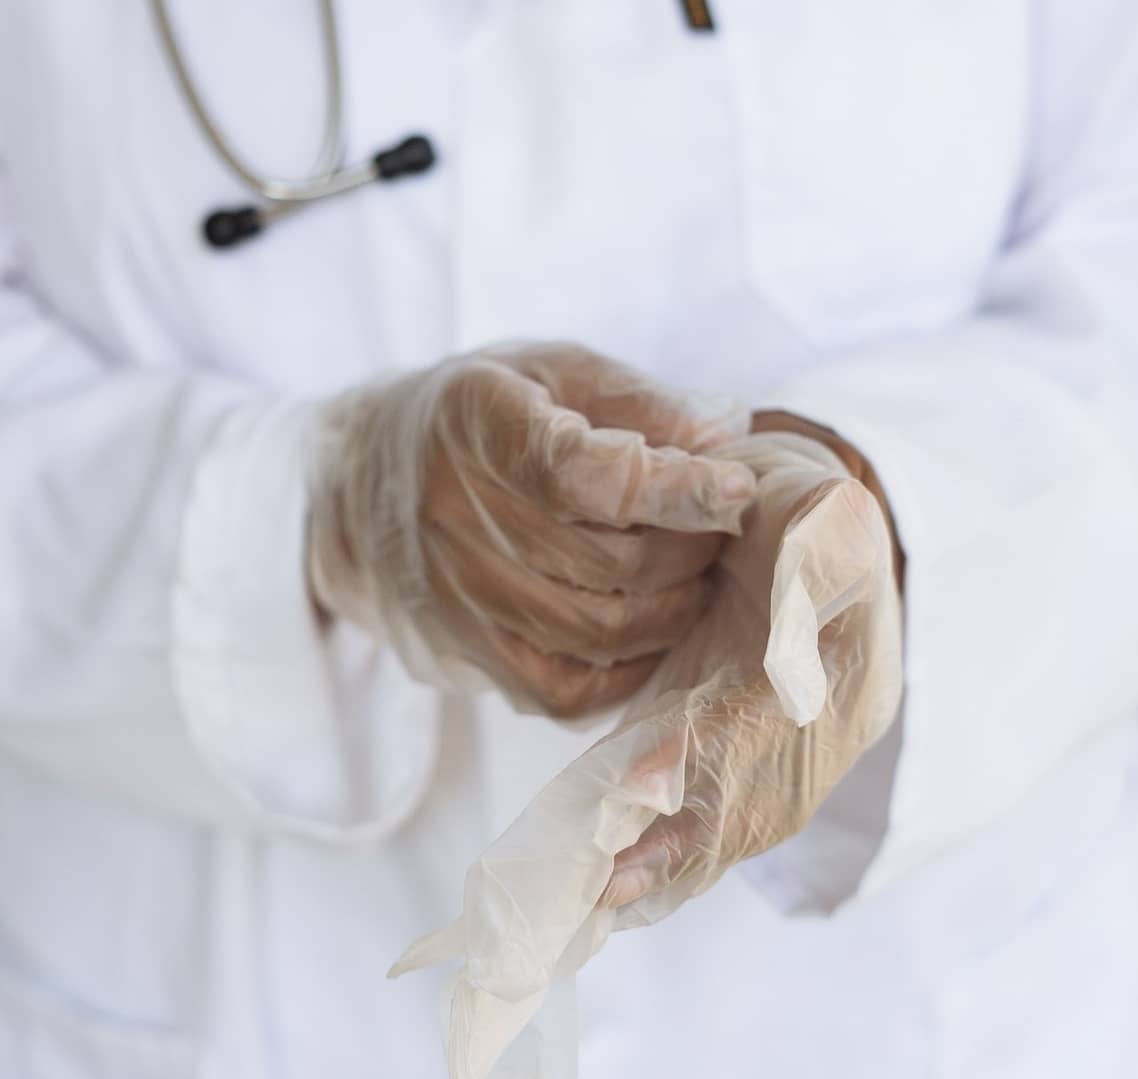 A doctor putting on gloves